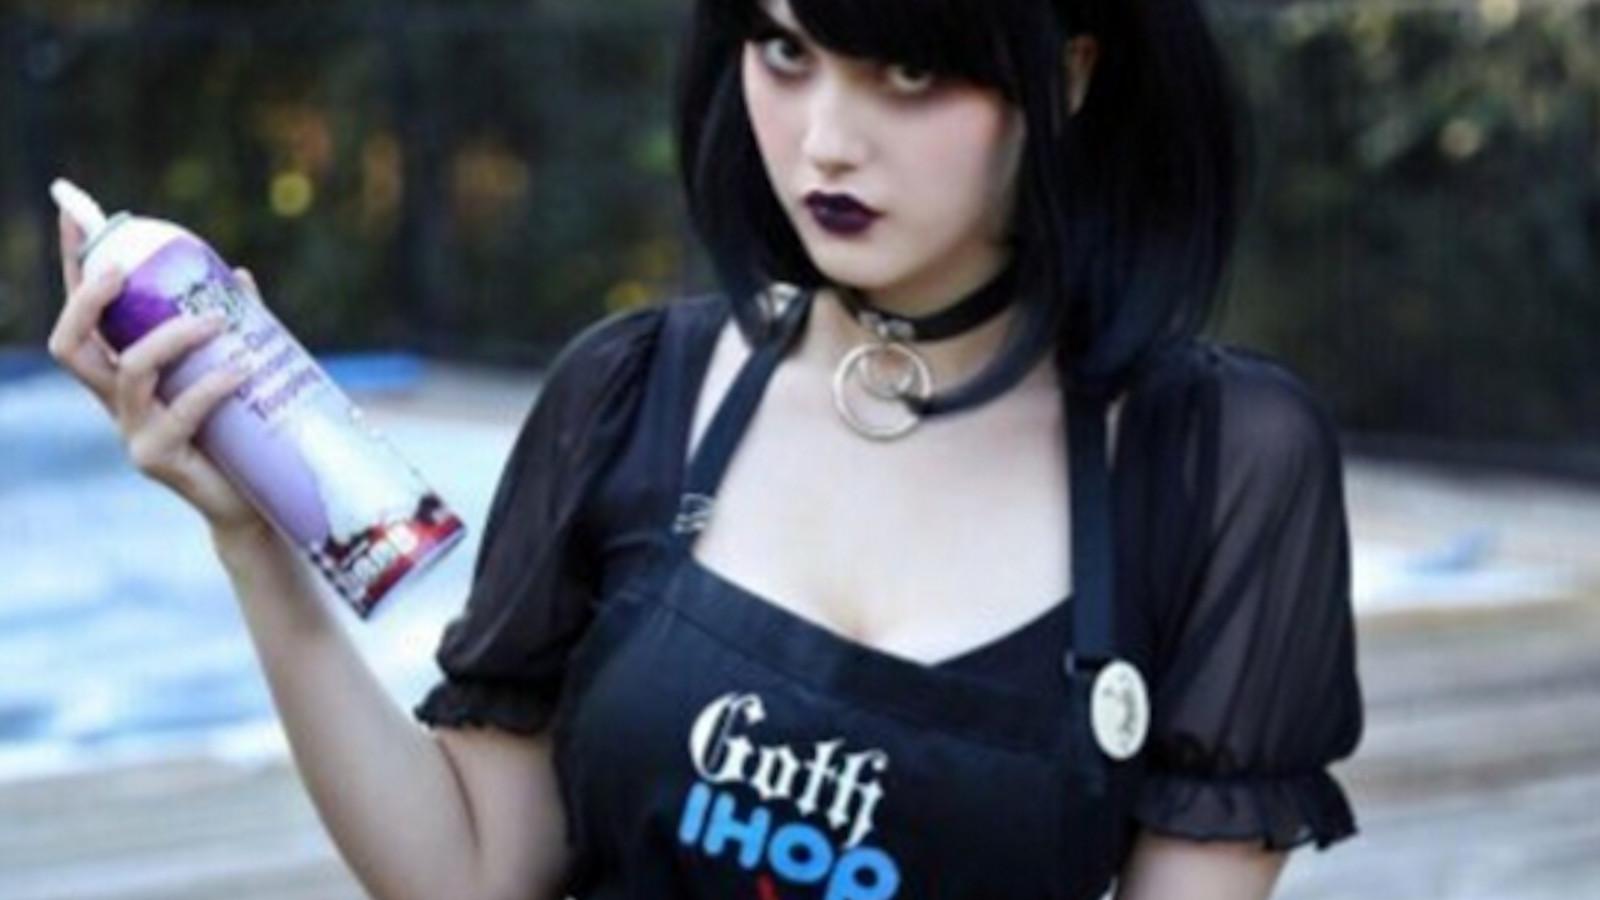 goth IHOP cosplay outfit